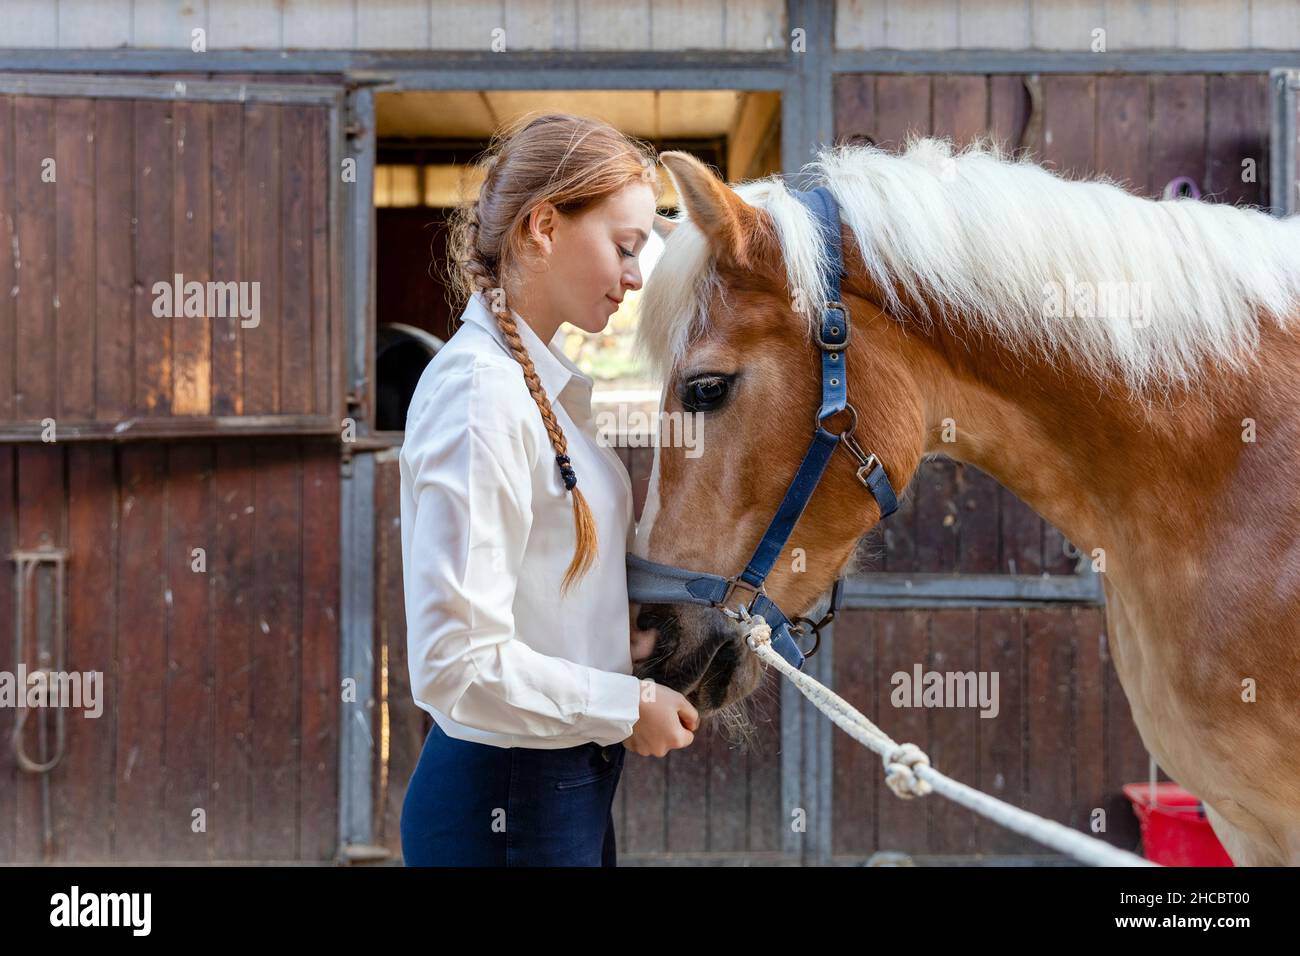 Young woman with horse standing at stable Stock Photo